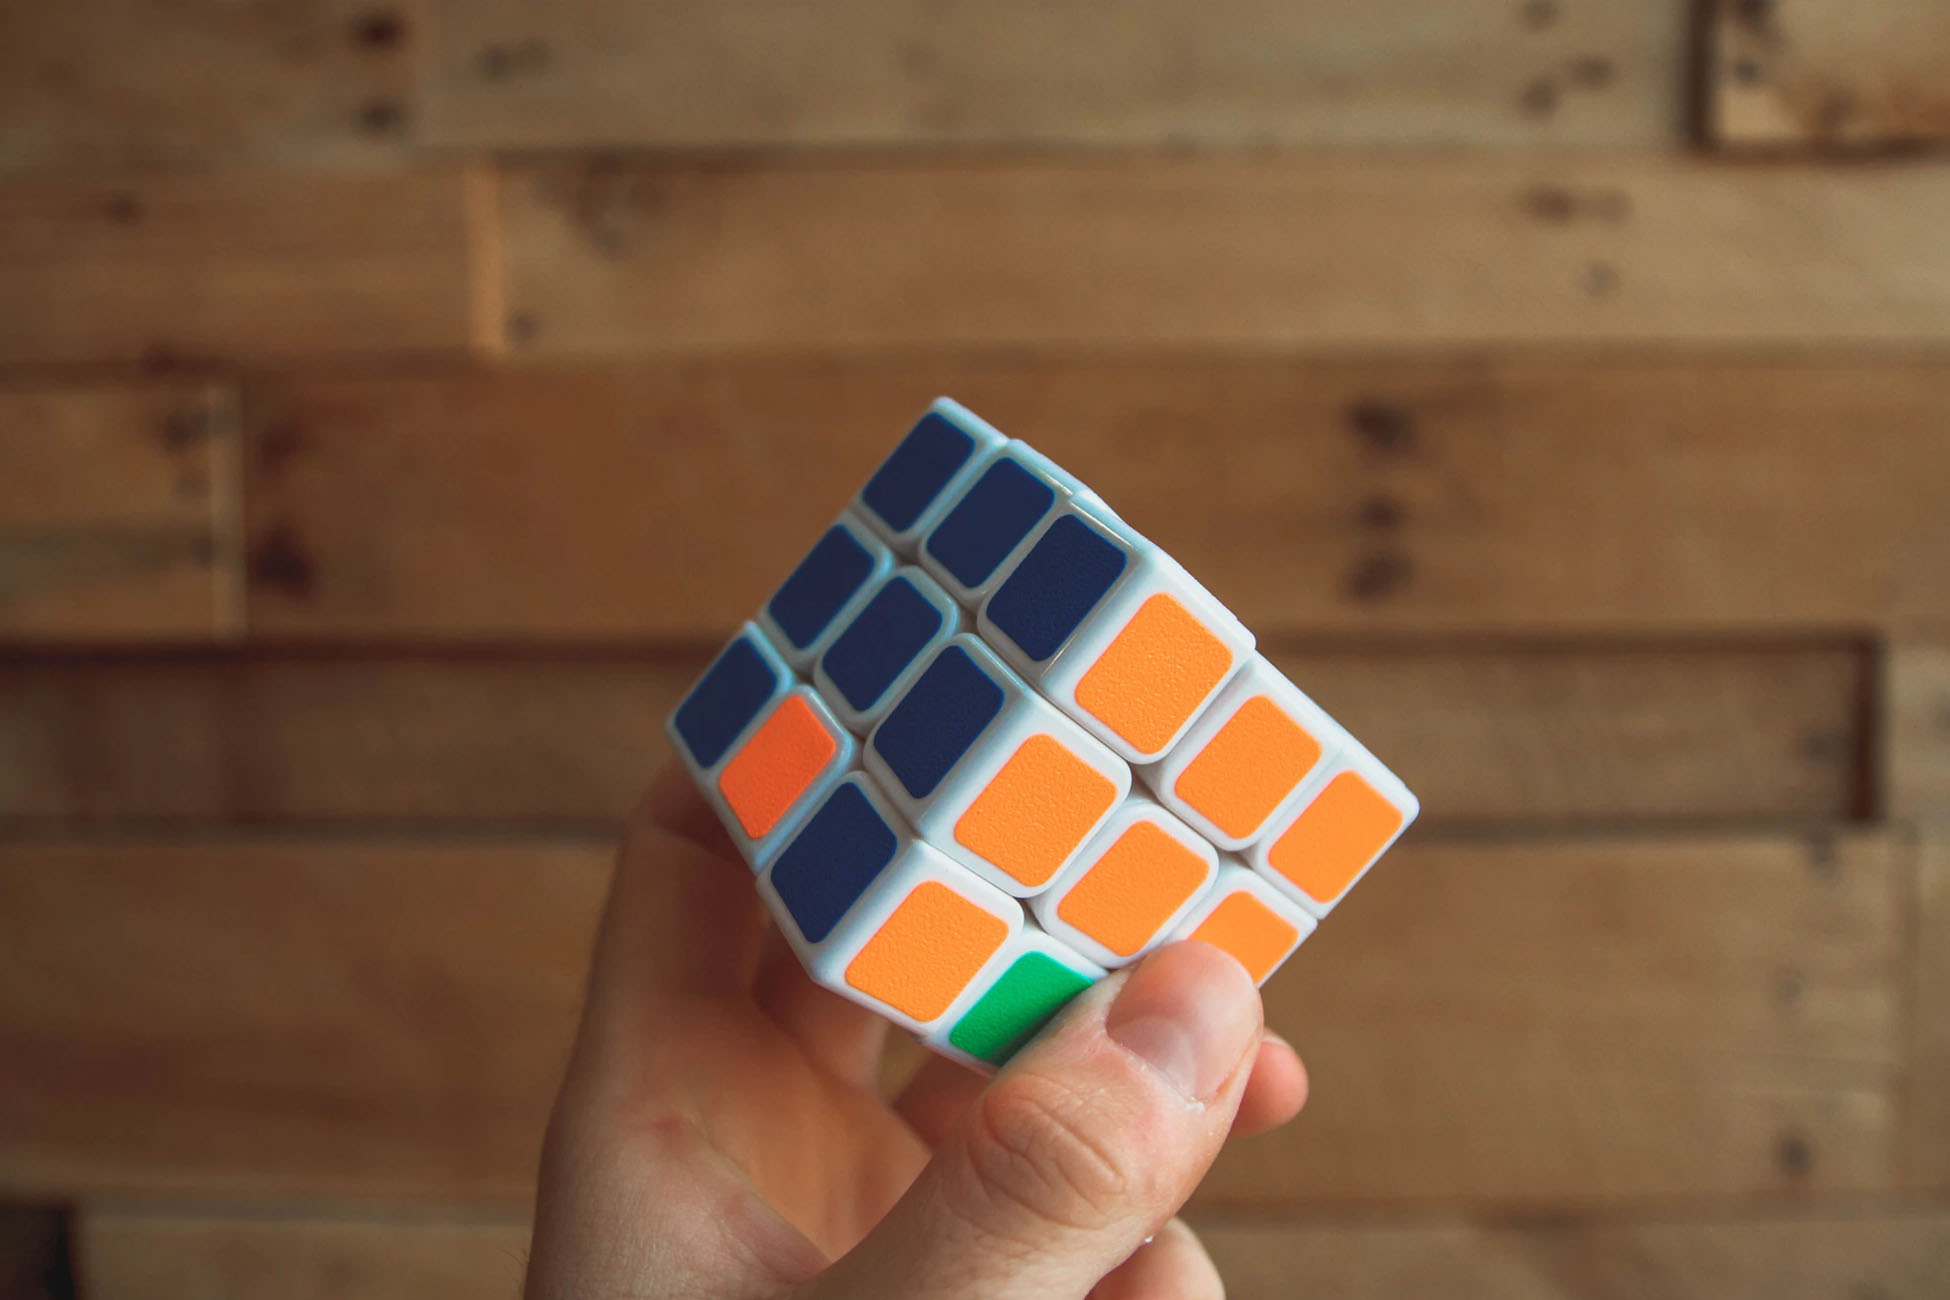 Image of an unfinished Rubik's cube